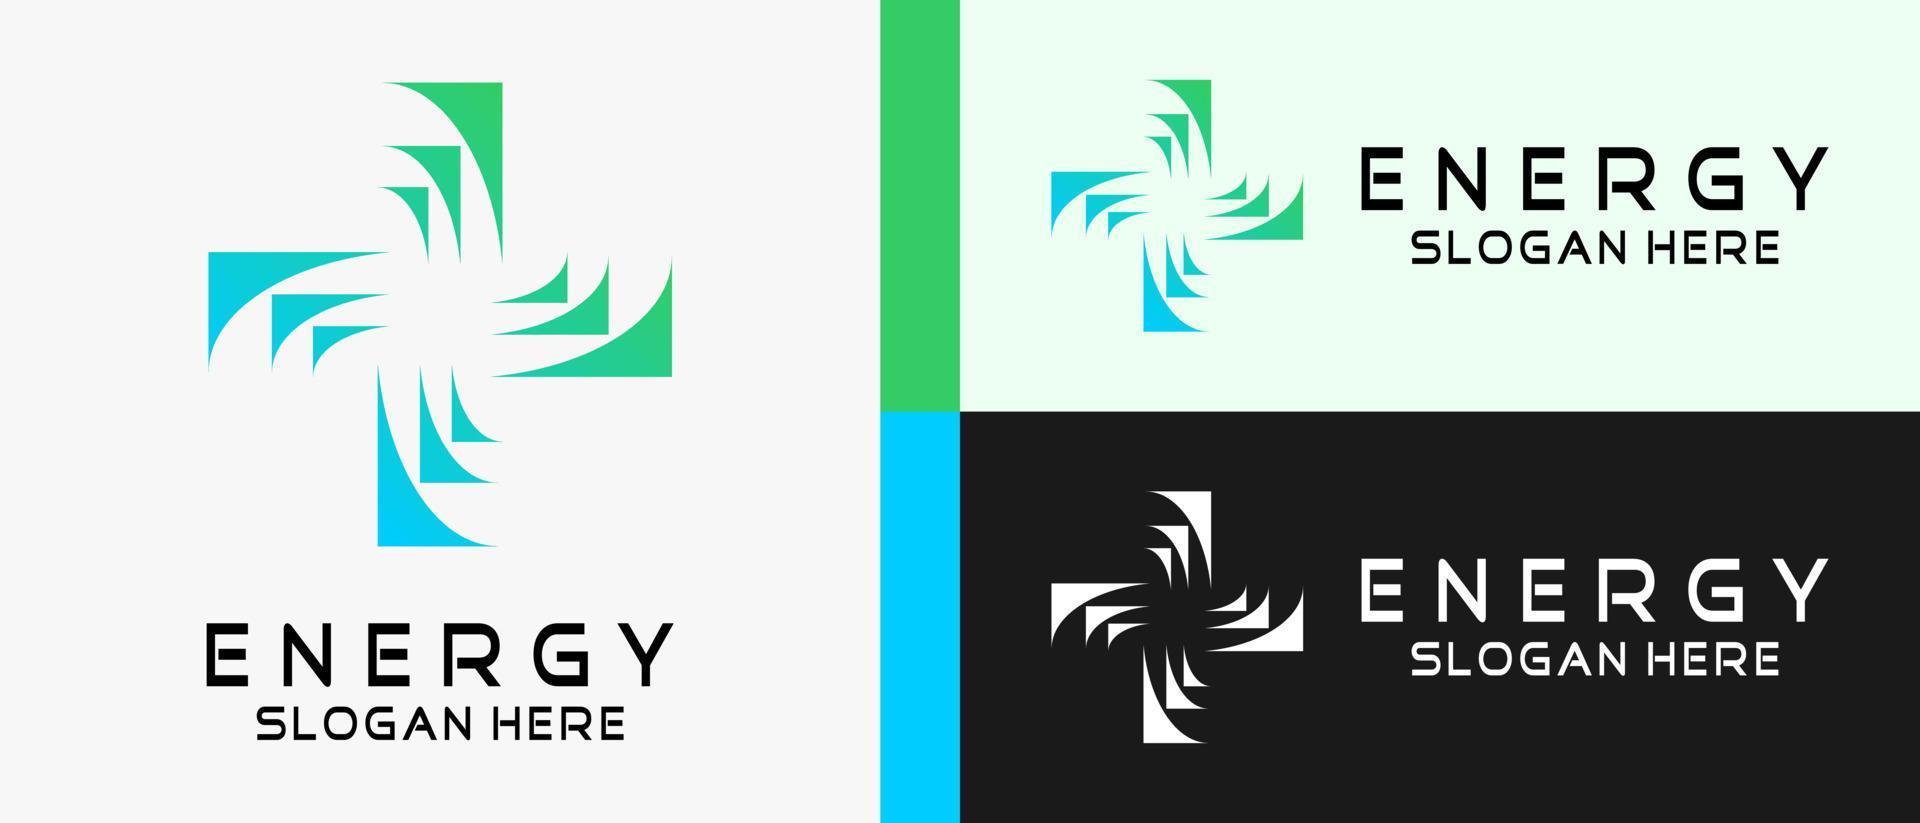 energy logo design template with a creative concept in the form of a plus or cross sign. premium vector logo illustration